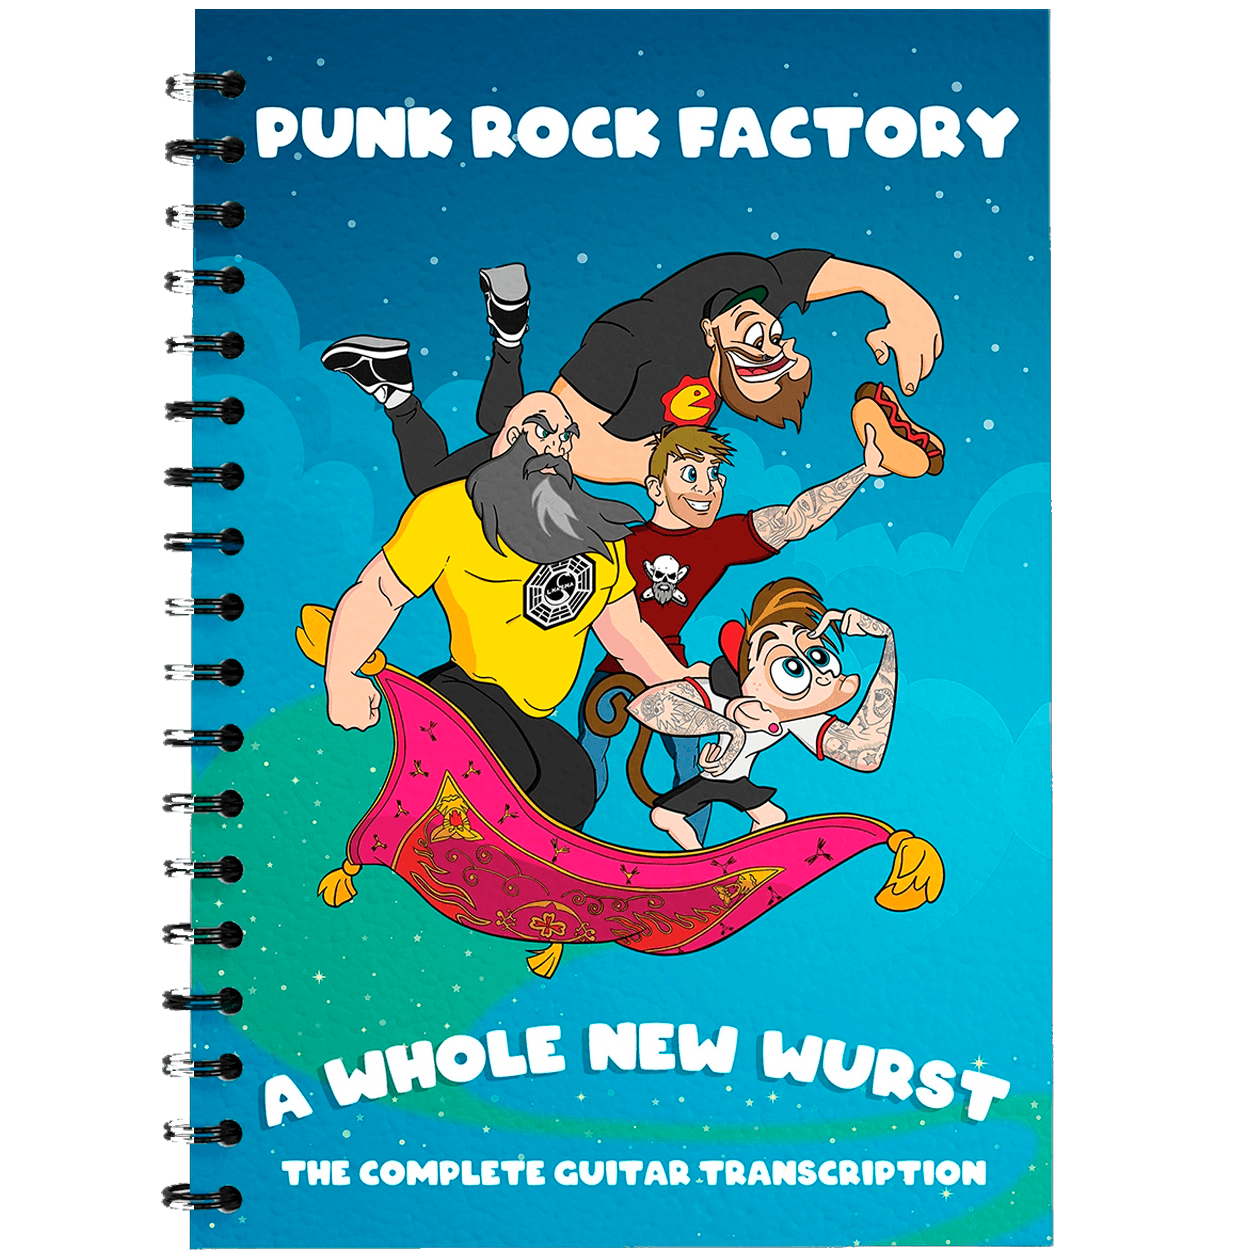 A Whole New Wurst: The Complete Guitar and Bass Transcription Apparel Punk Rock Factory 